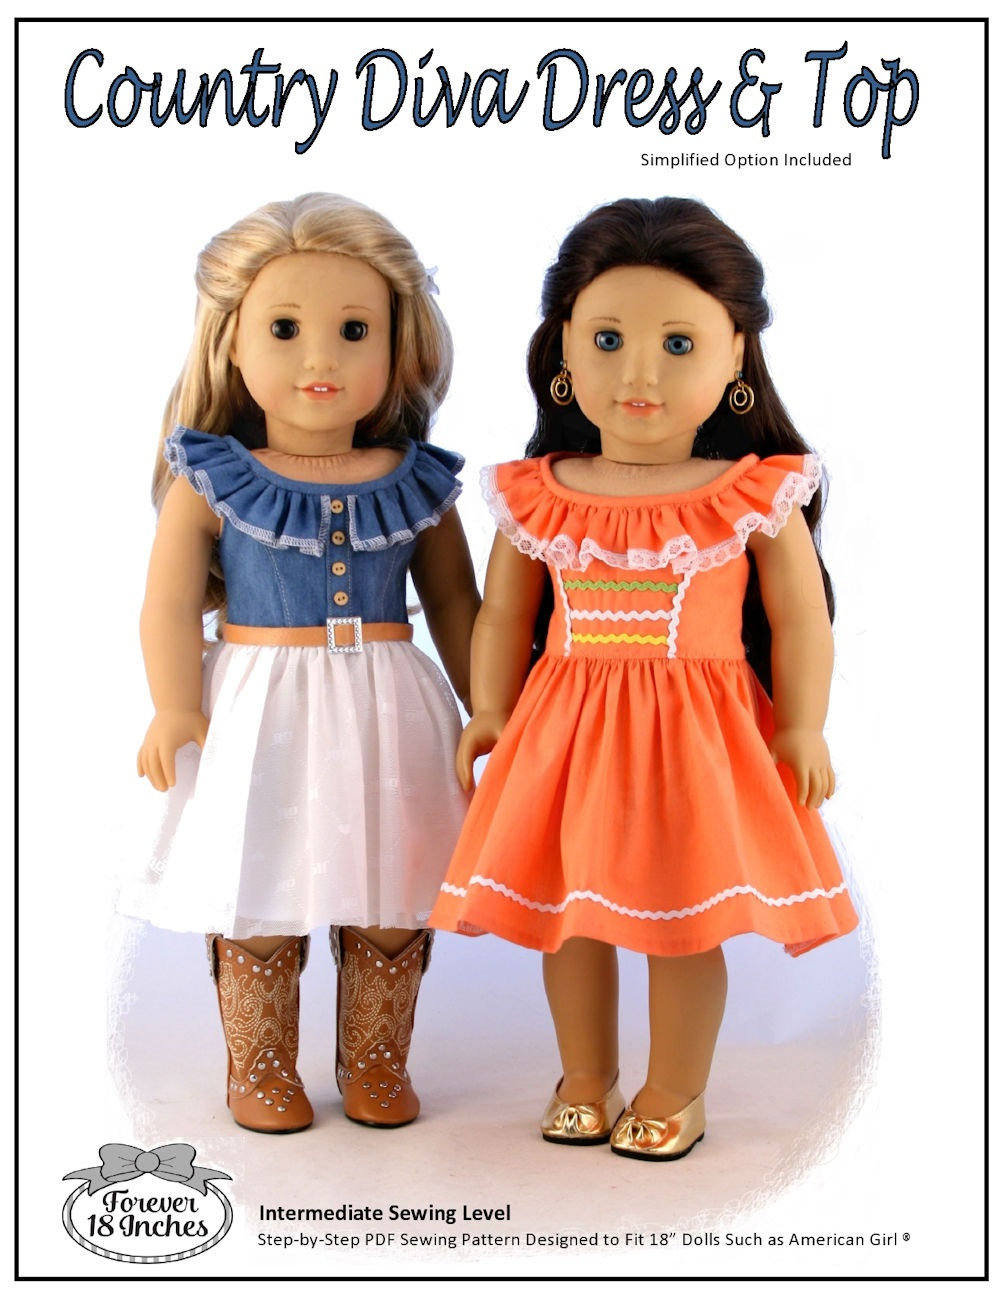 Country Diva Dress & Top 18 Inch Doll Clothes Pattern Fits Dolls